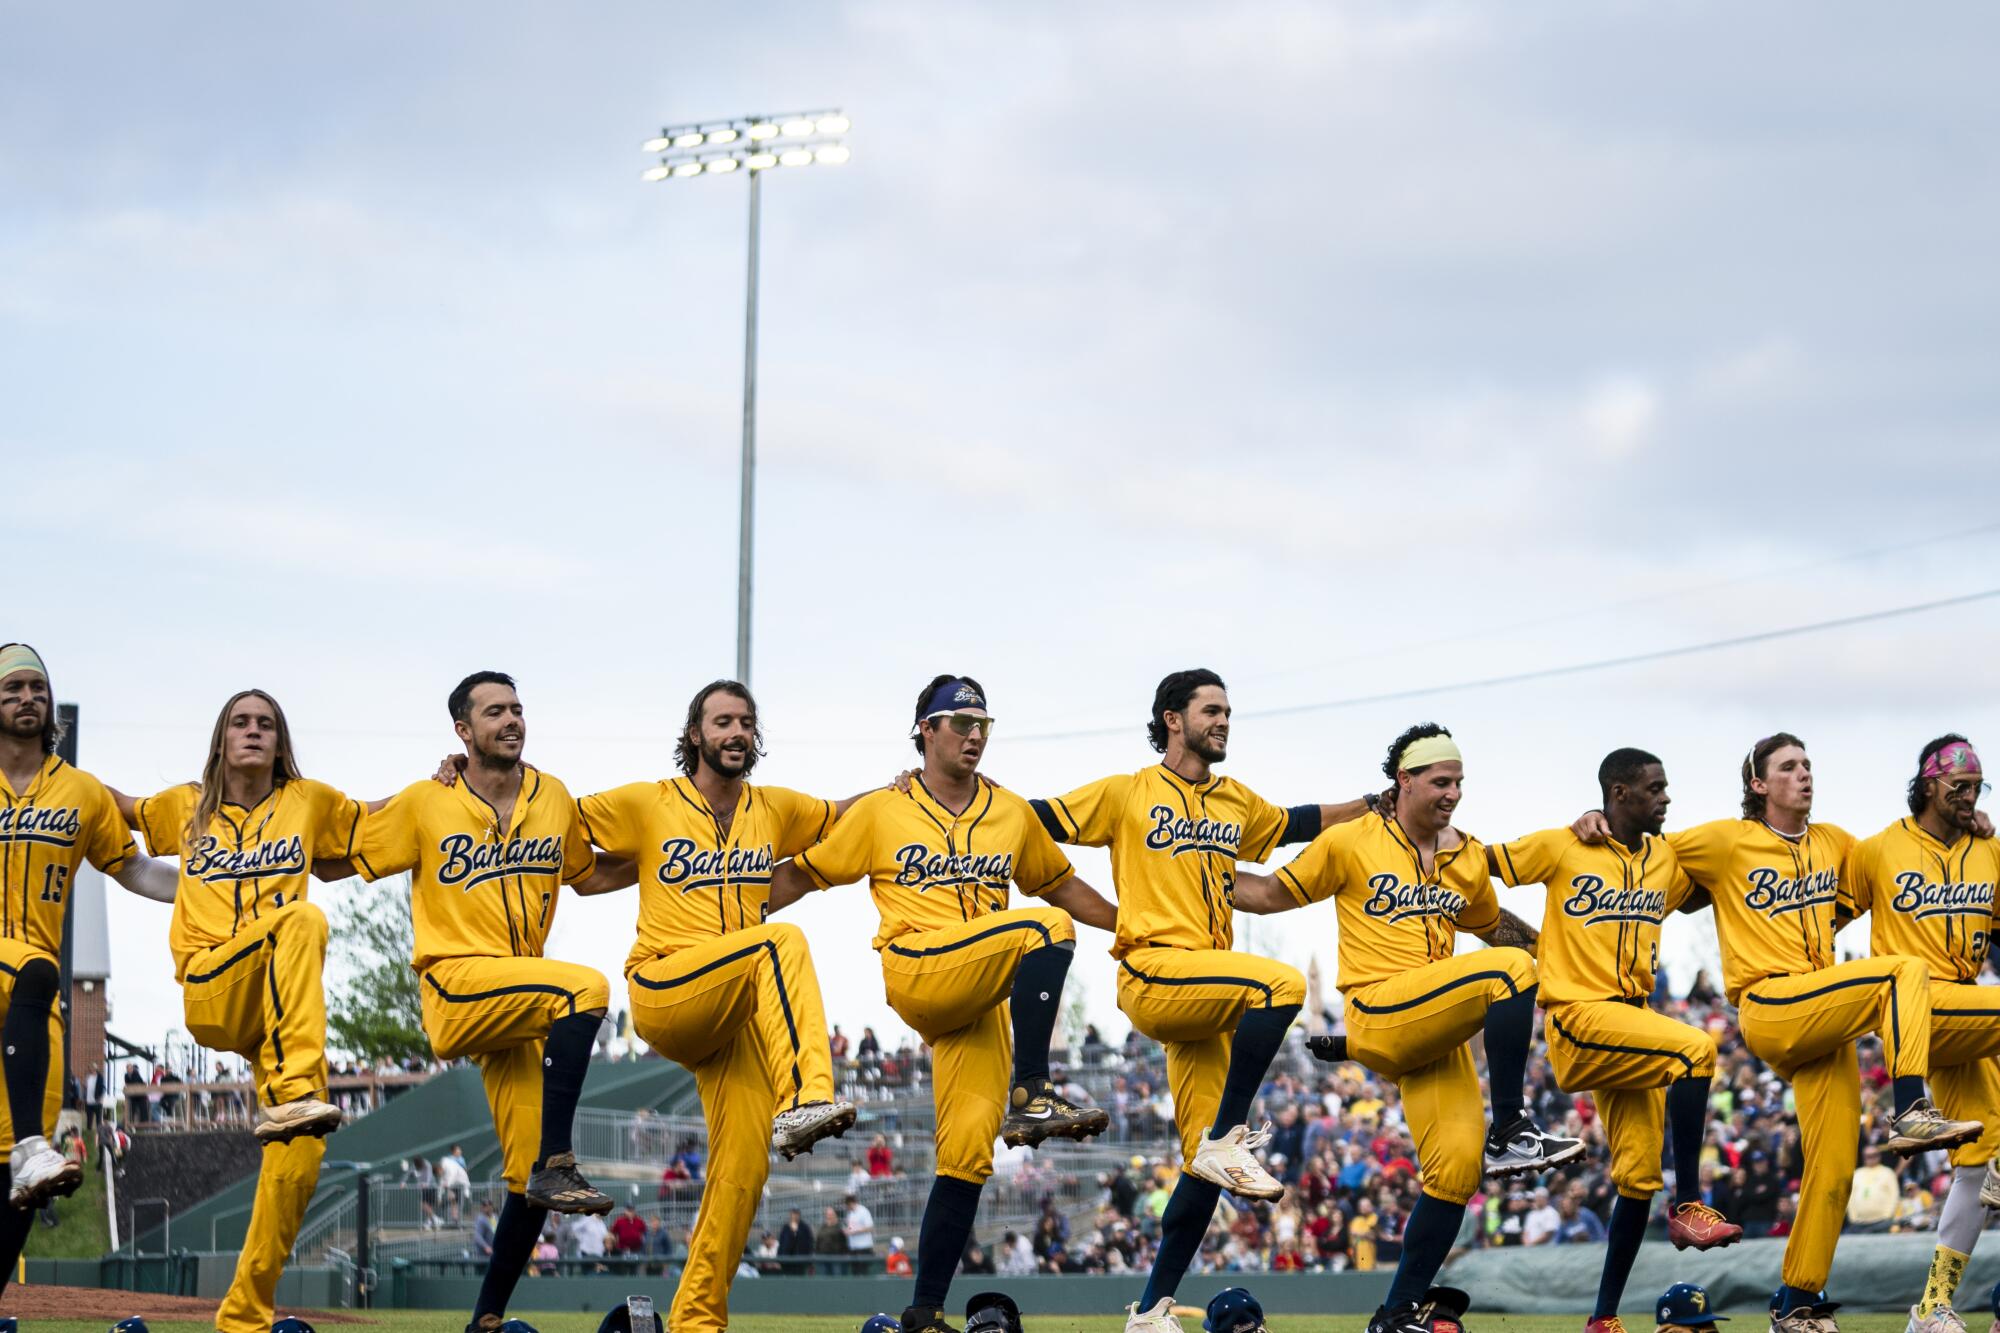 Meet the Savannah Bananas, who wow fans and have MLB's attention - Los  Angeles Times